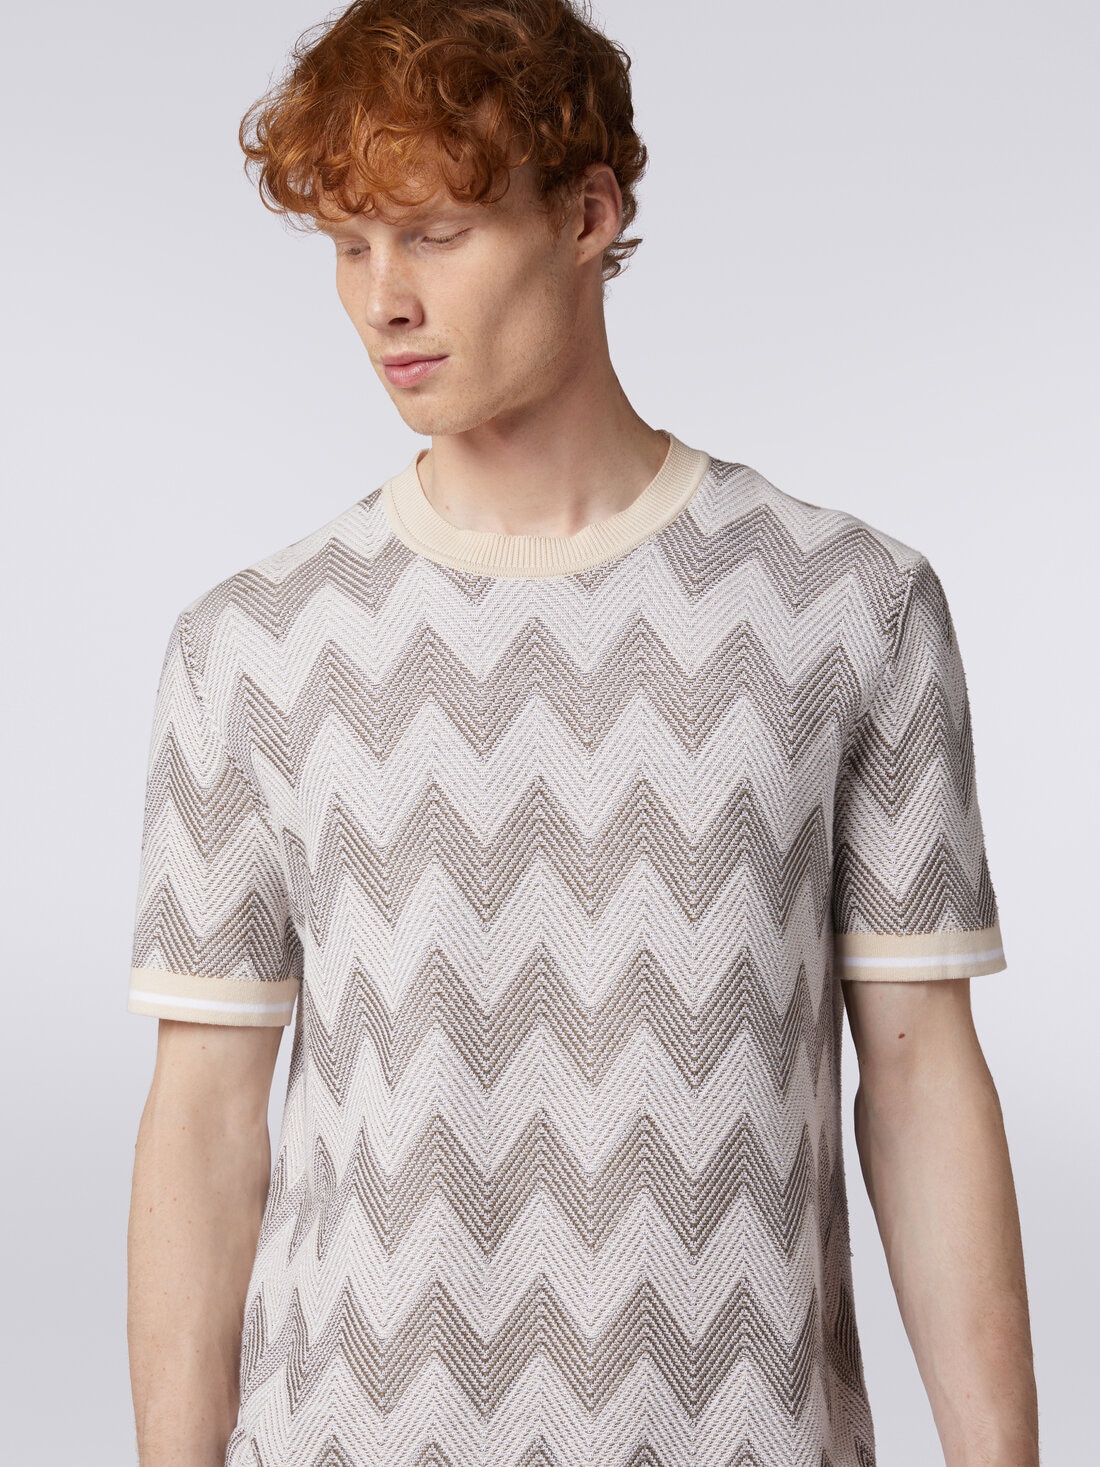 T-shirt in chevron cotton knit with contrasting trim, Multicoloured  - US24SL0HBK034YS80BX - 4